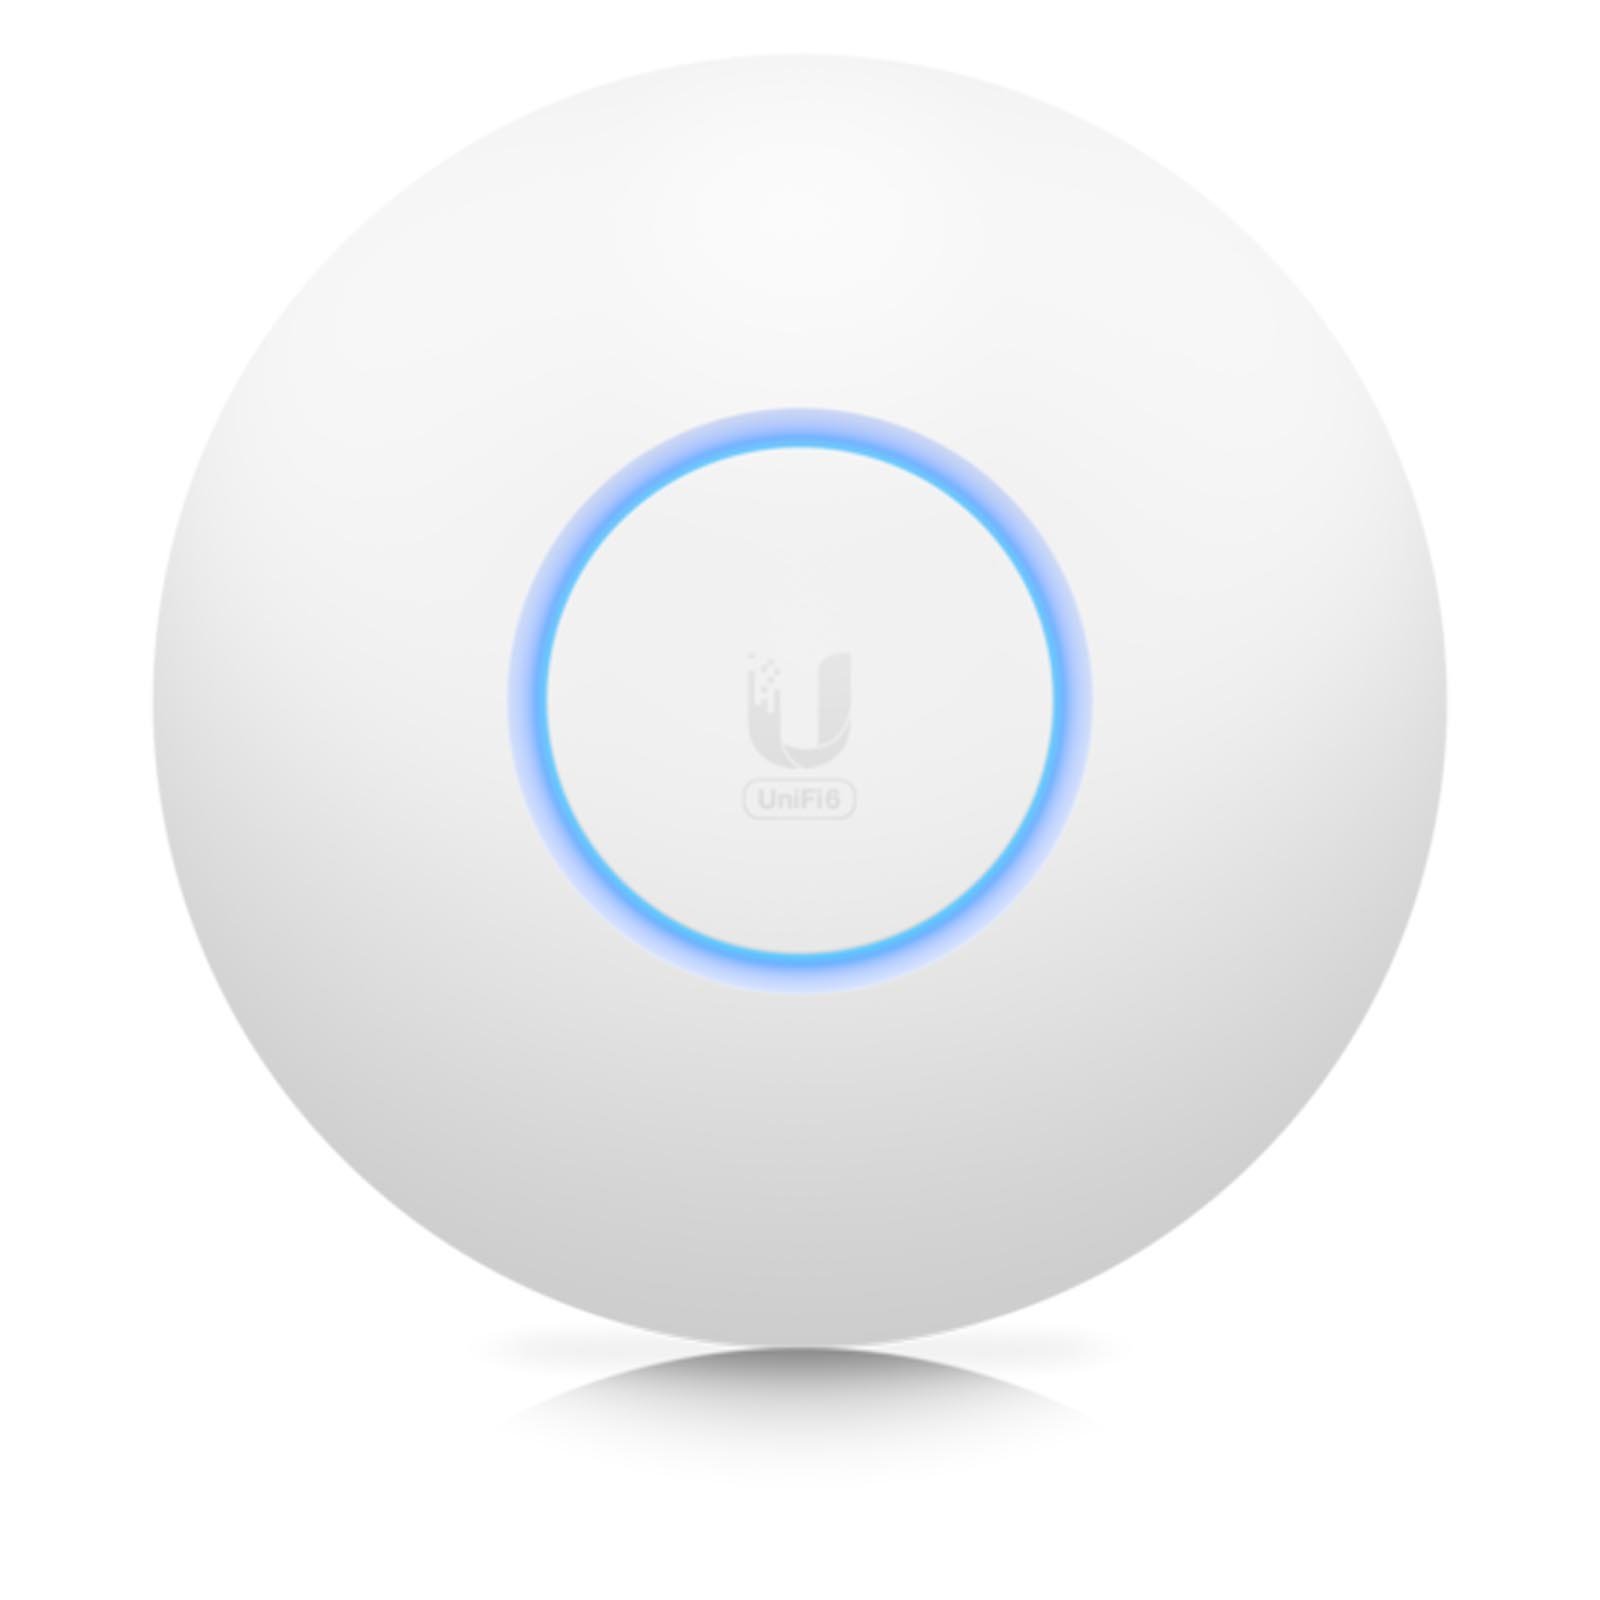 Ubiquiti U6+ access point. WiFi 6 model with throughput rate of 573.5 Mbps at 2.4 GHz and 2402 Mbps at 5 GHz. No POE injector included. UI r Access point